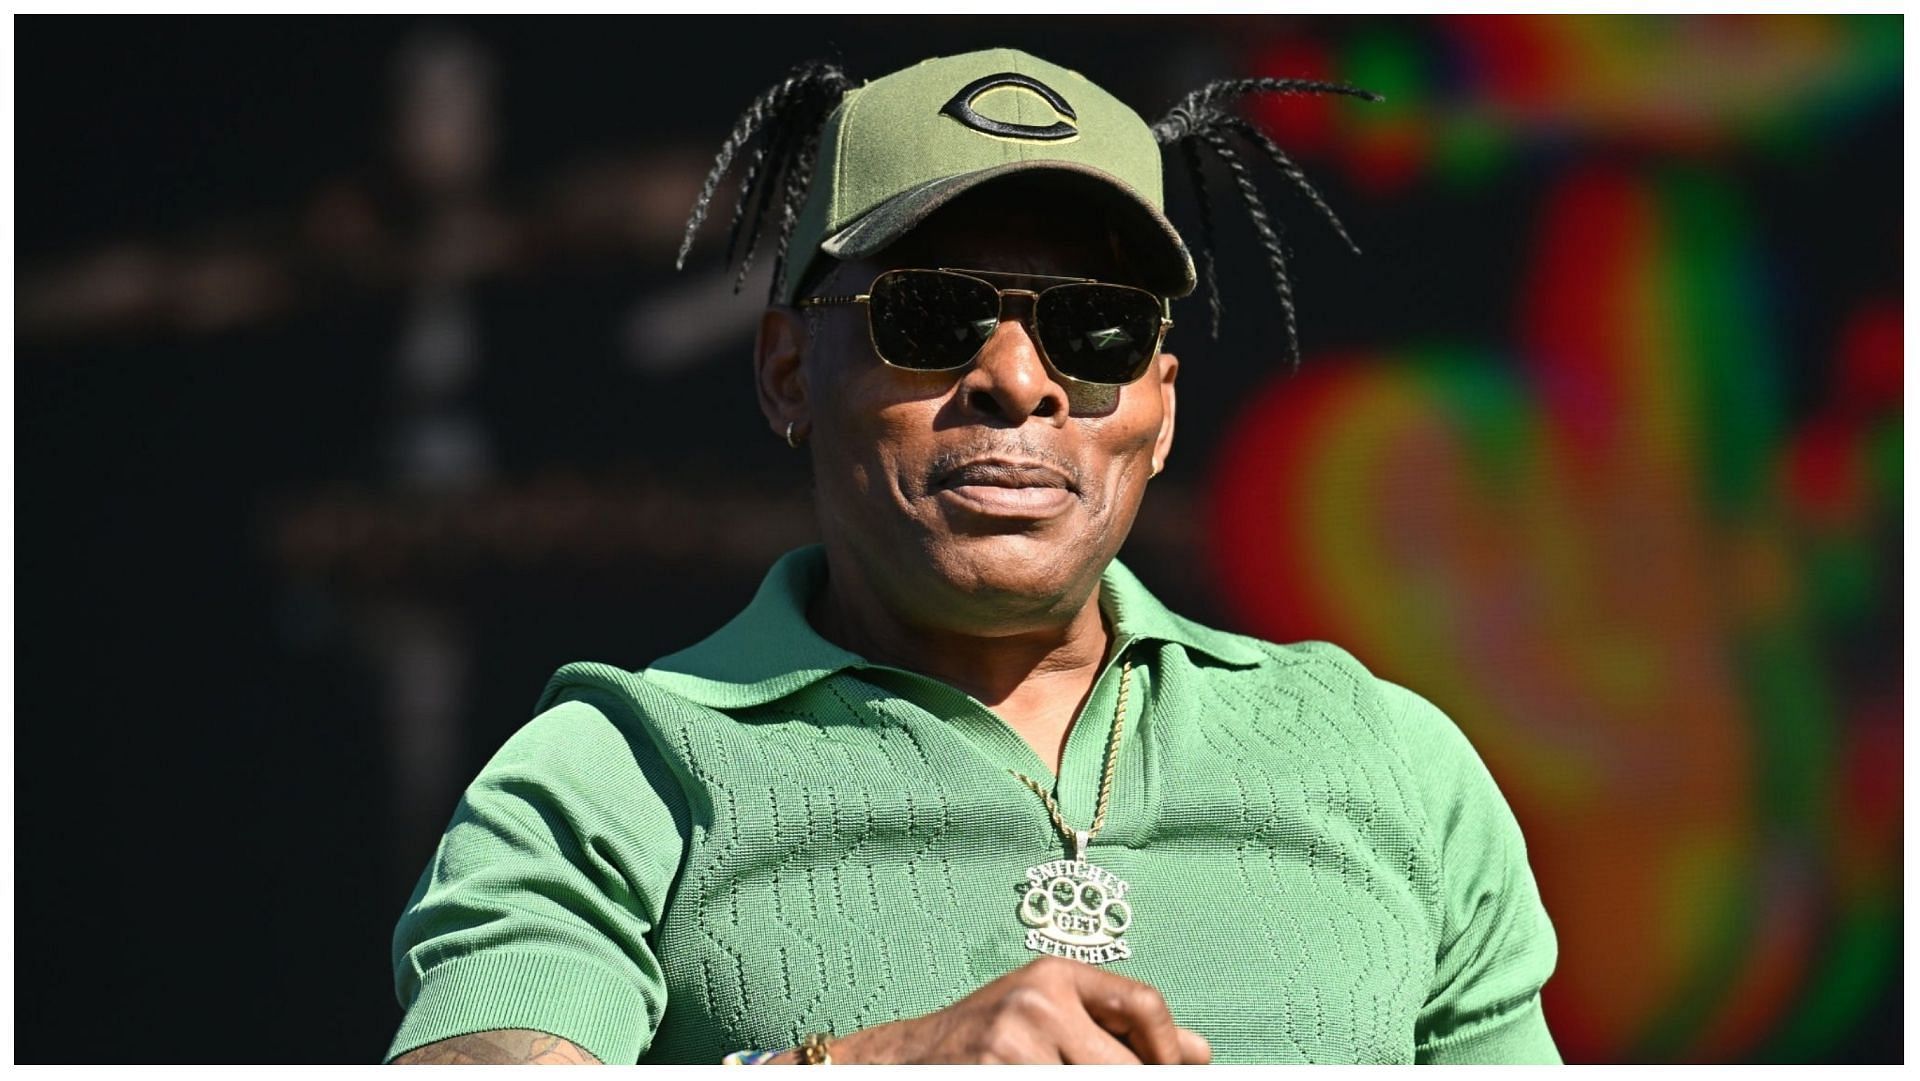 Coolio recently died at the age of 59 (Image via Daniel Boczarski/Getty Images)